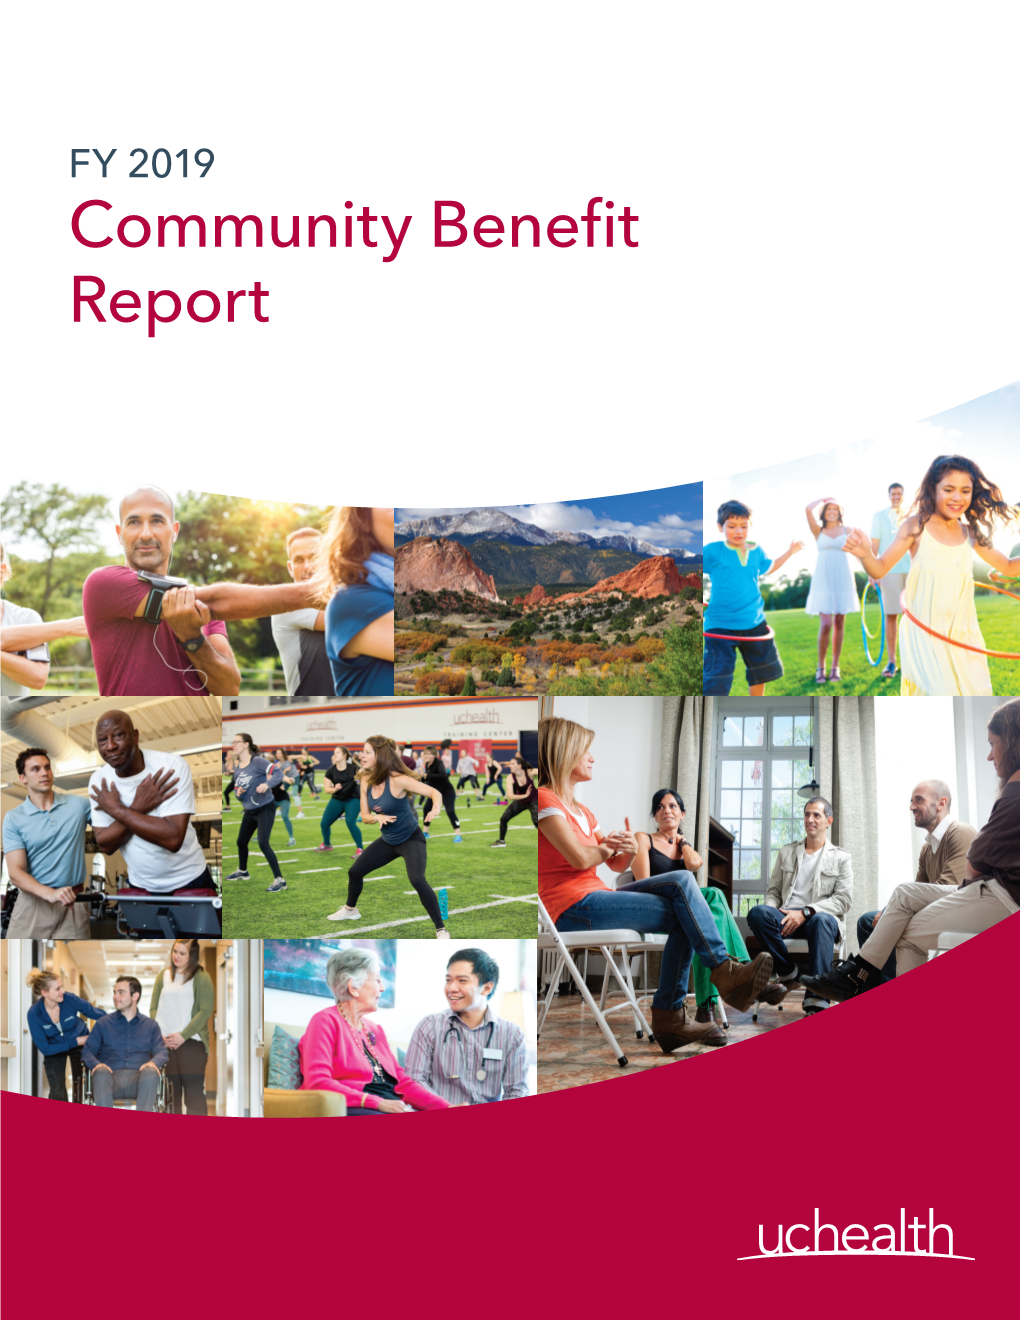 FY 2019 Community Benefit Report Improving the Lives of Those We Serve